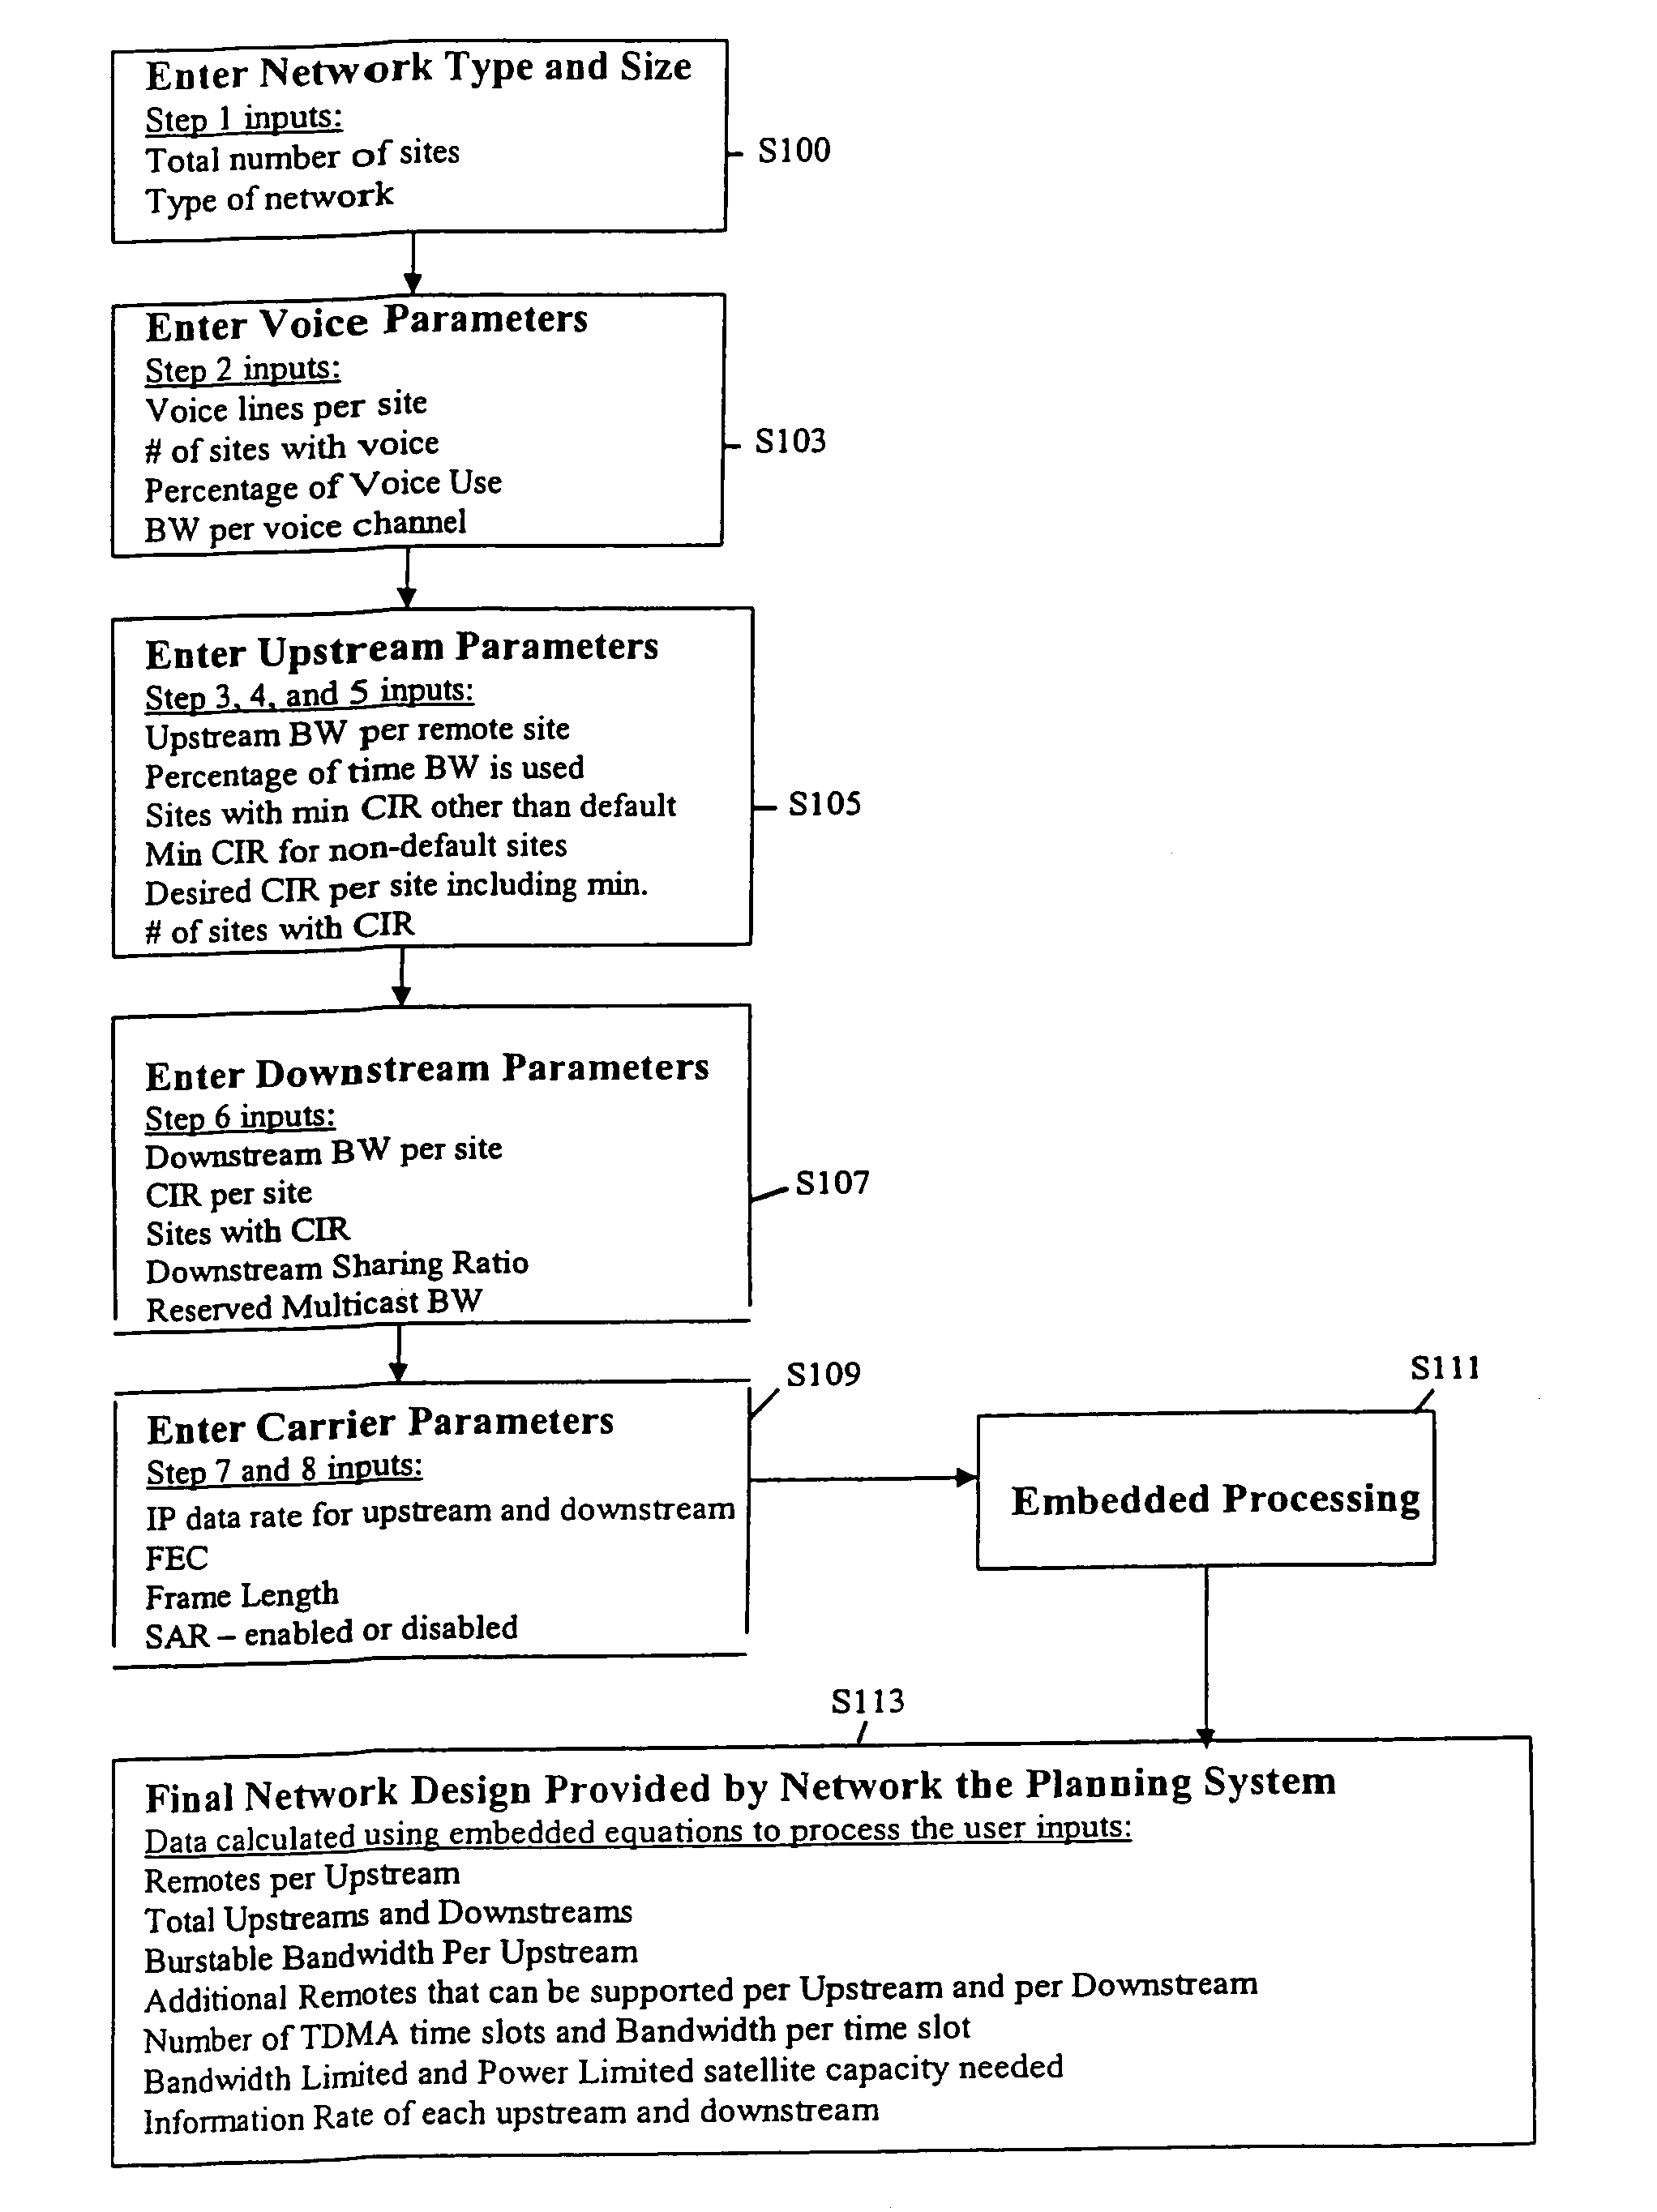 Method, apparatus, and system for designing and planning a shared satellite communications network